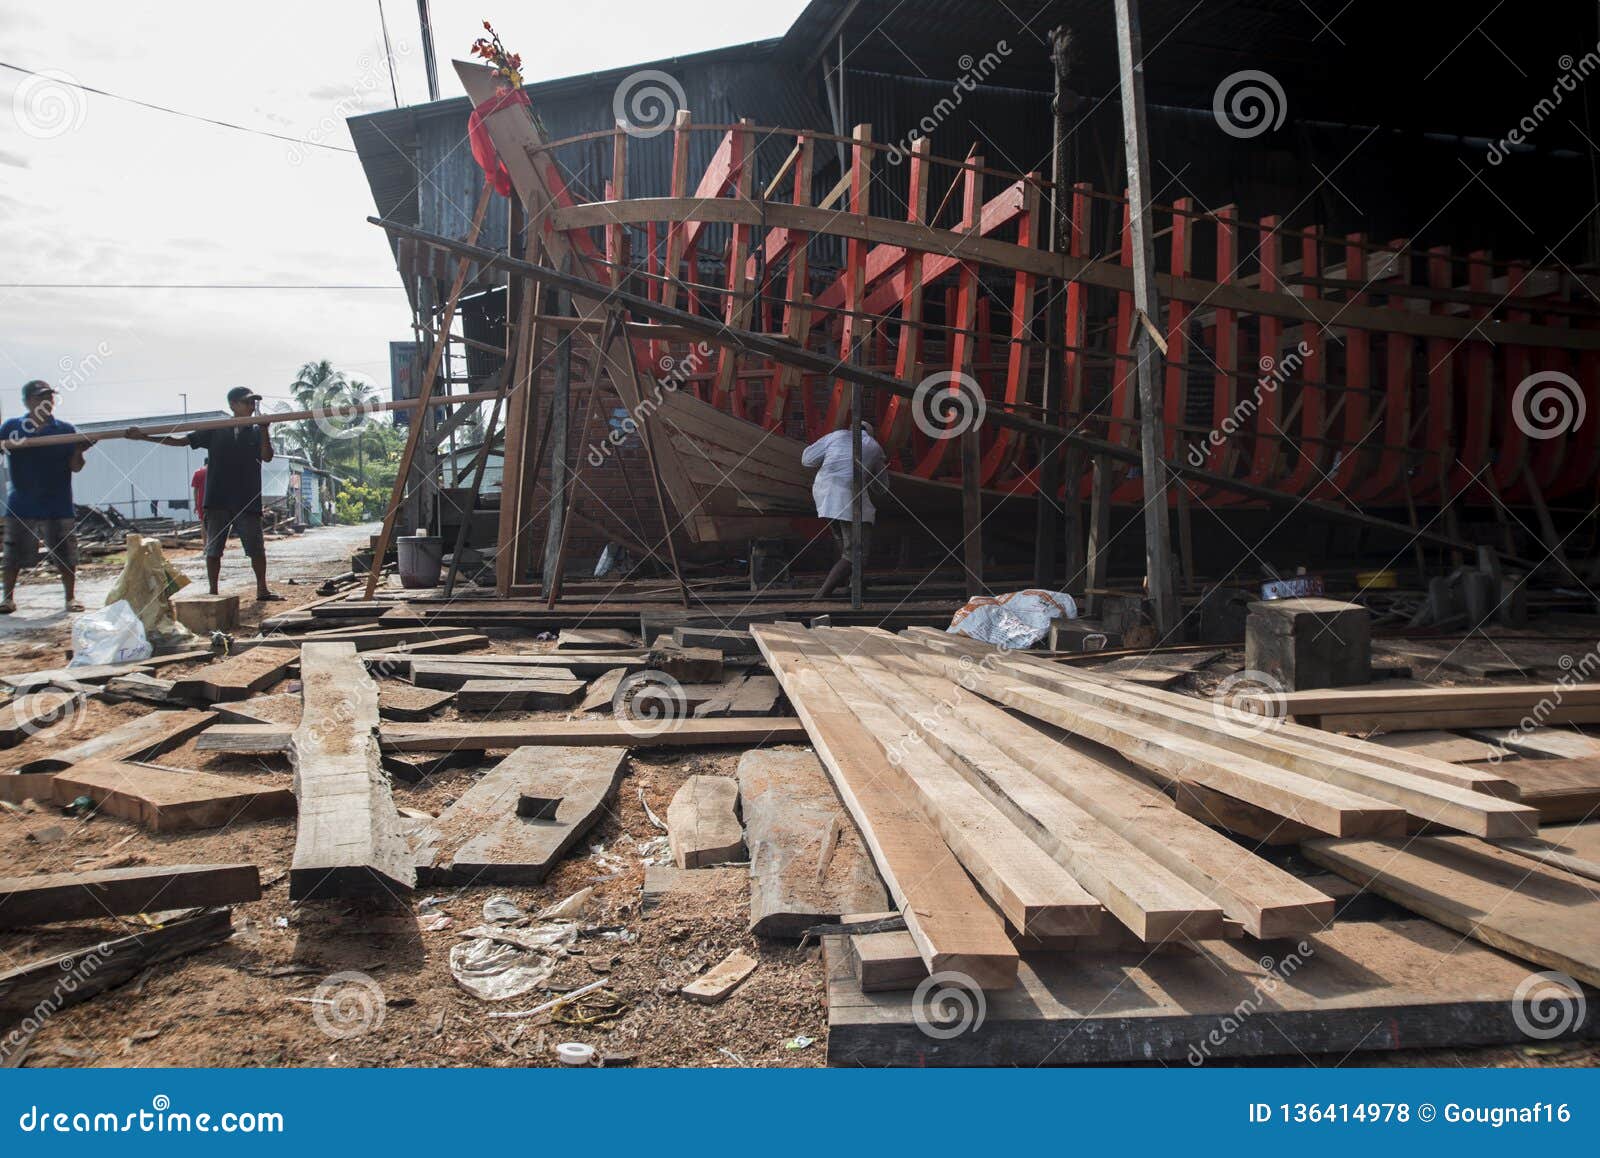 Vietnamese Workers Build A Large Wooden Boat In Nga Bay In ...